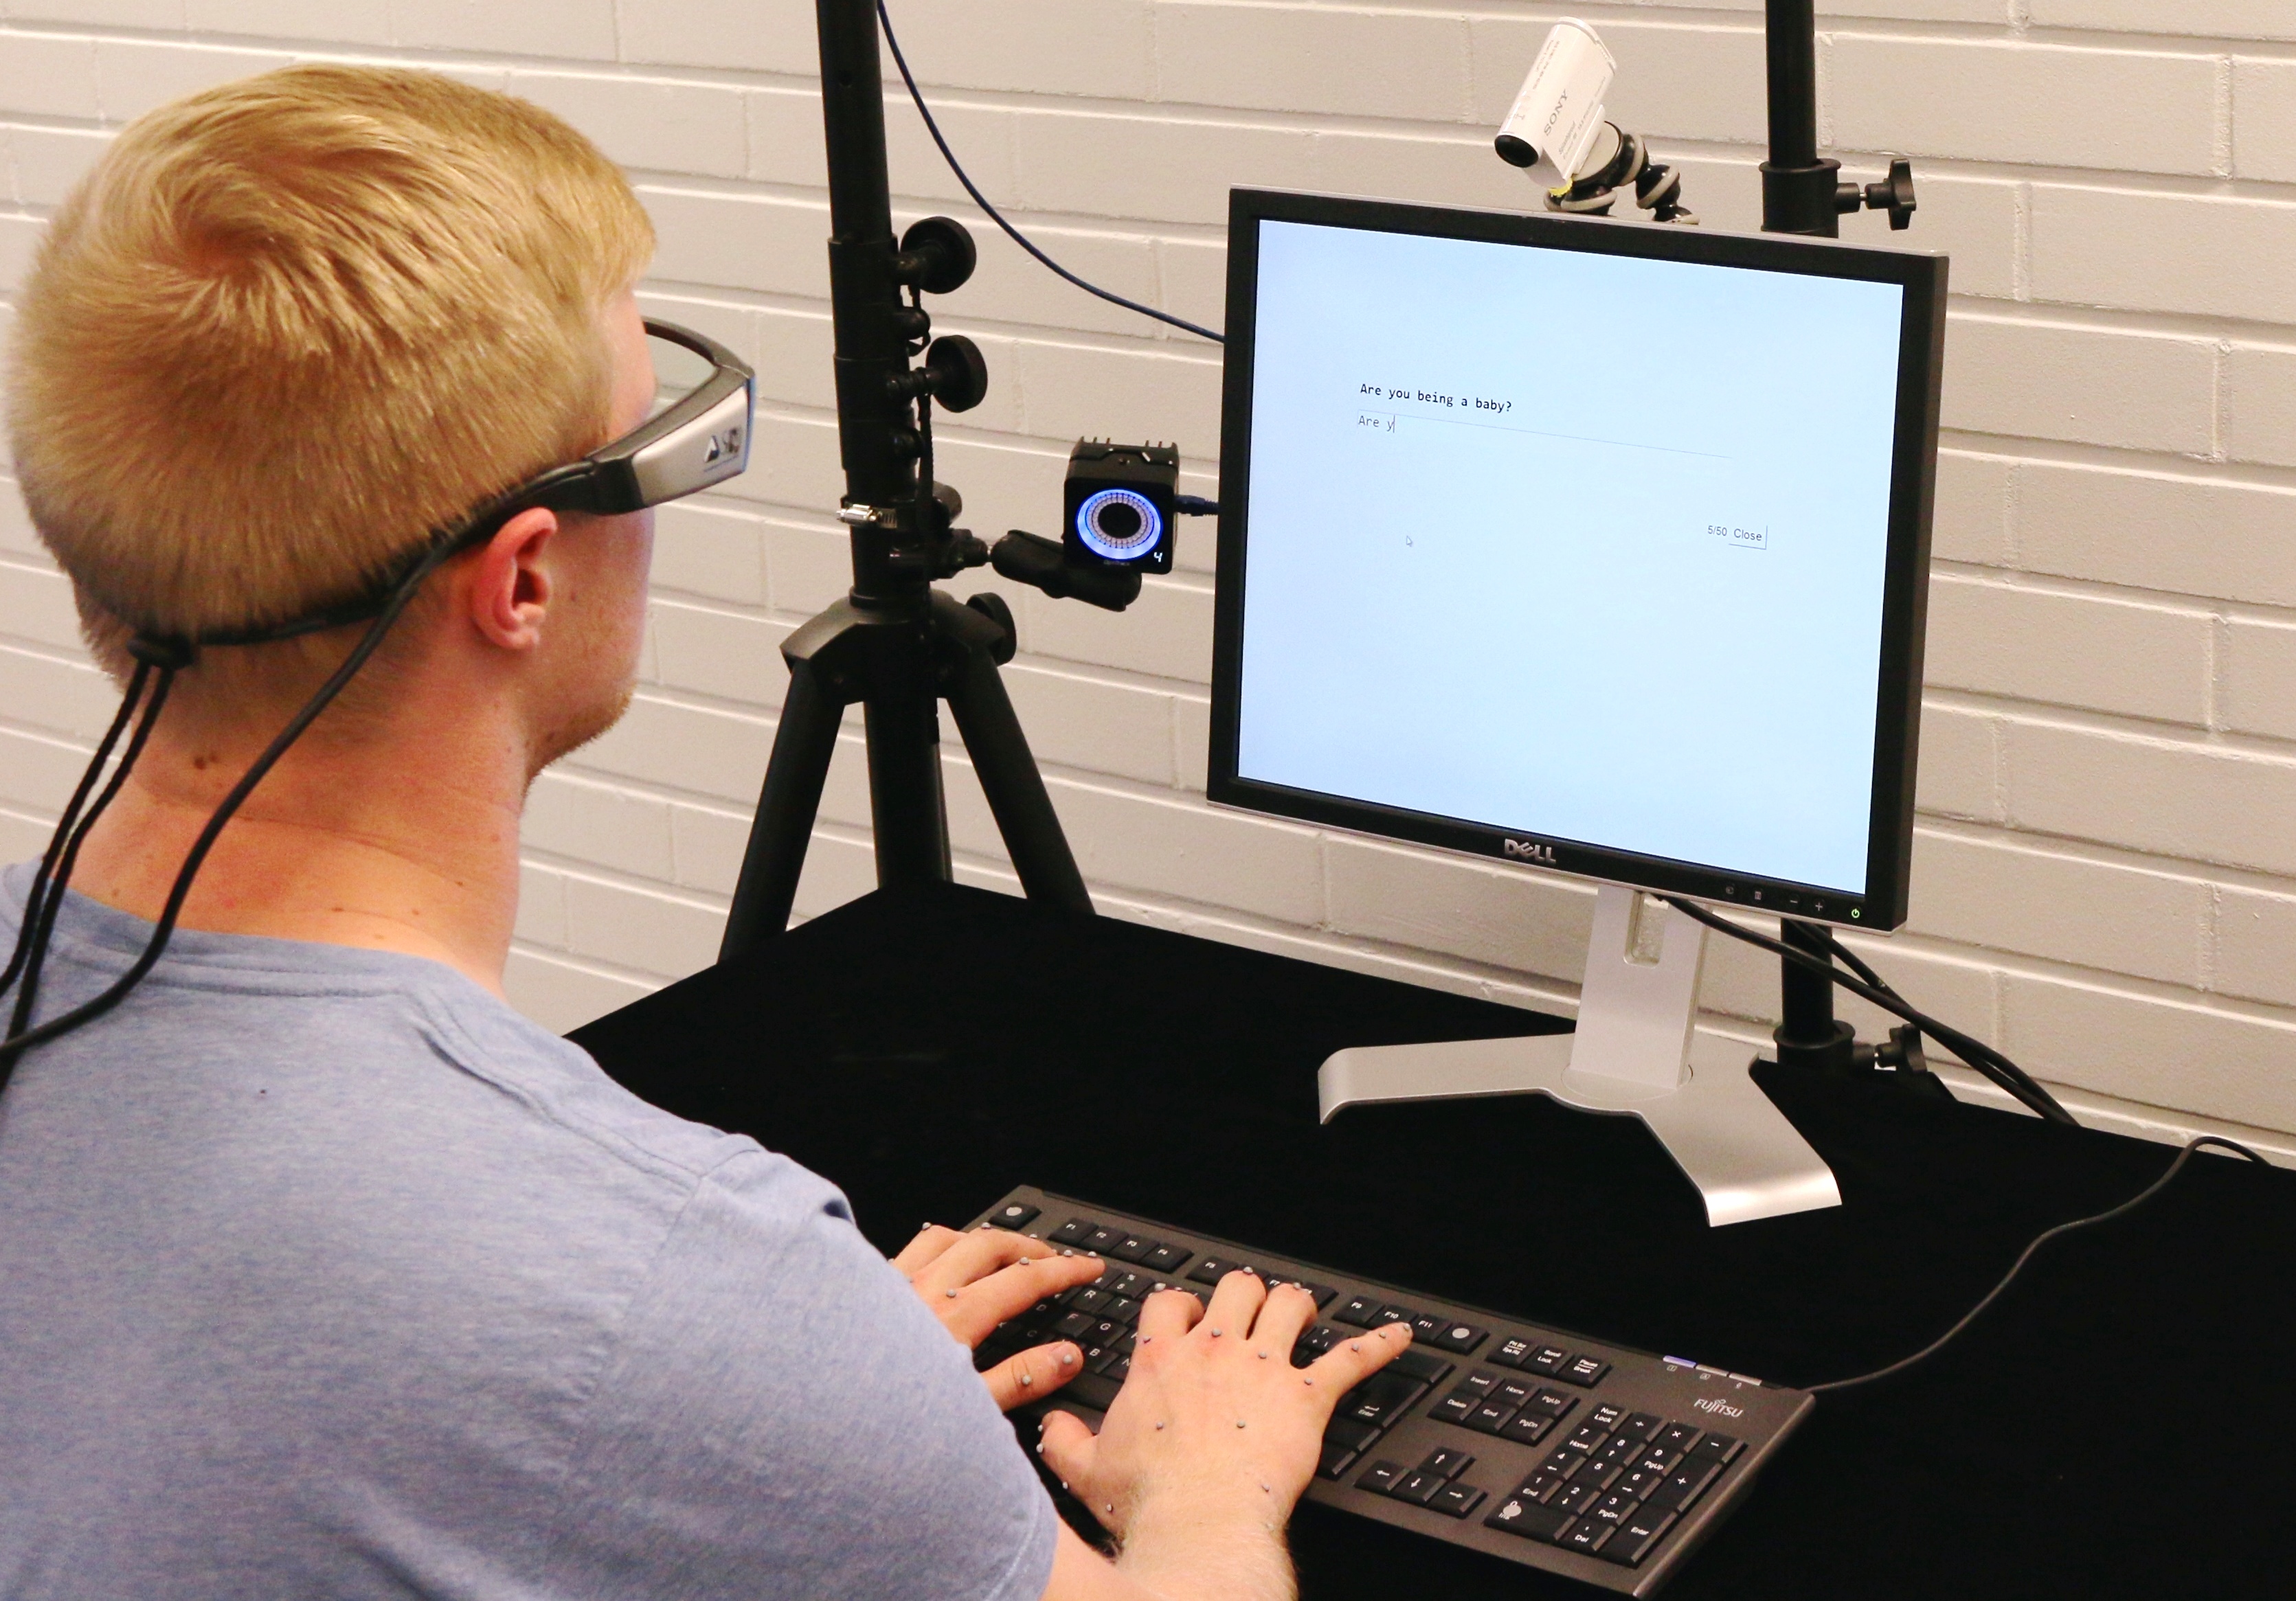 Typist with eye tracking glasses